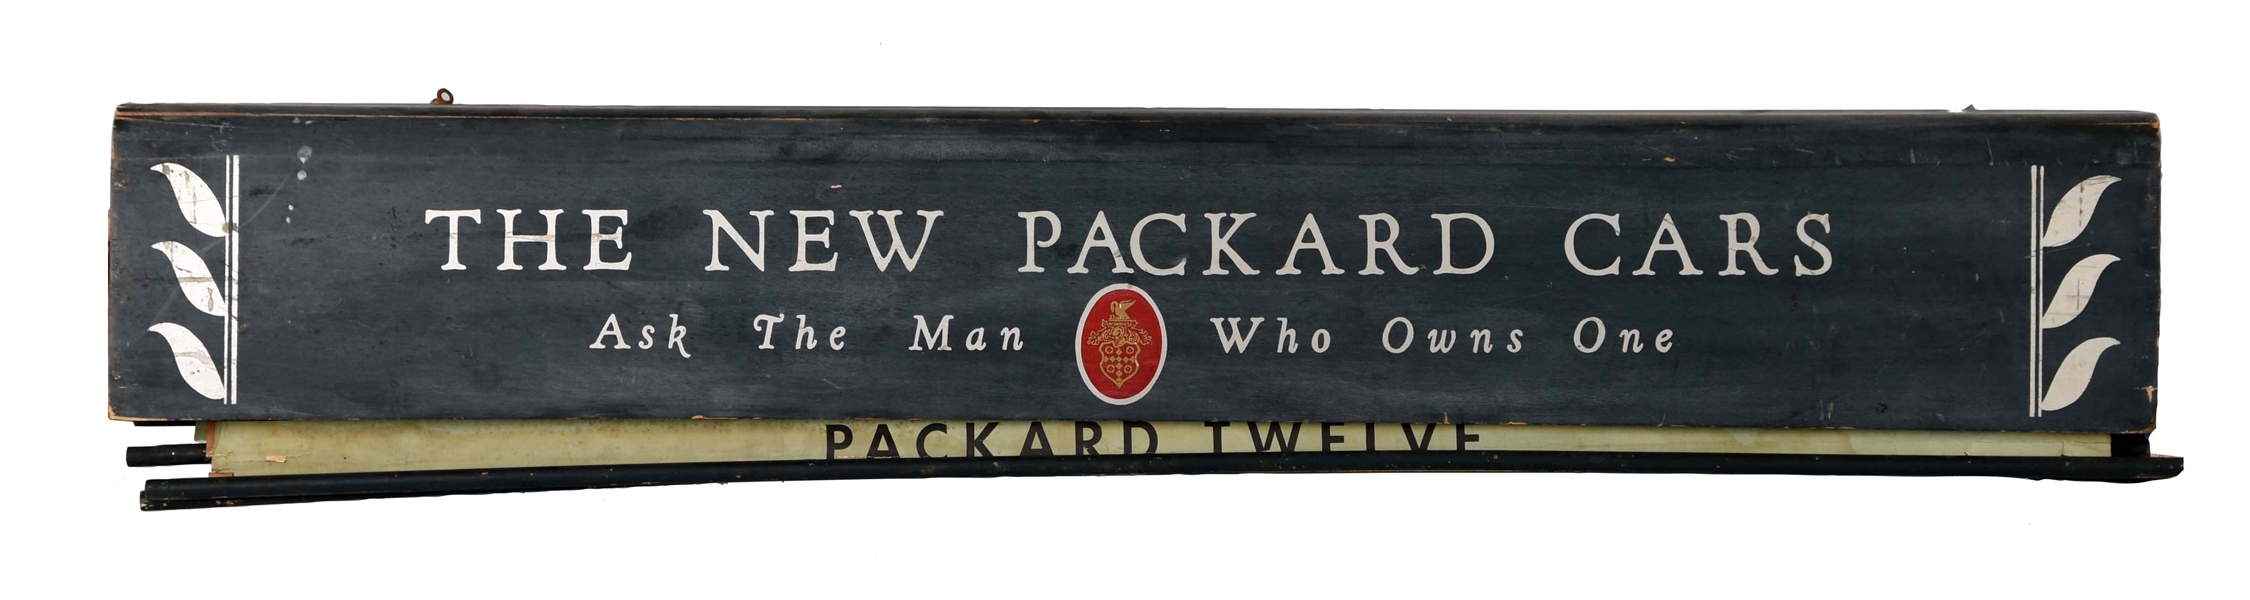 THE NEW PACKARD CARS ROLL DOWN BANNER SIGN.                                                  